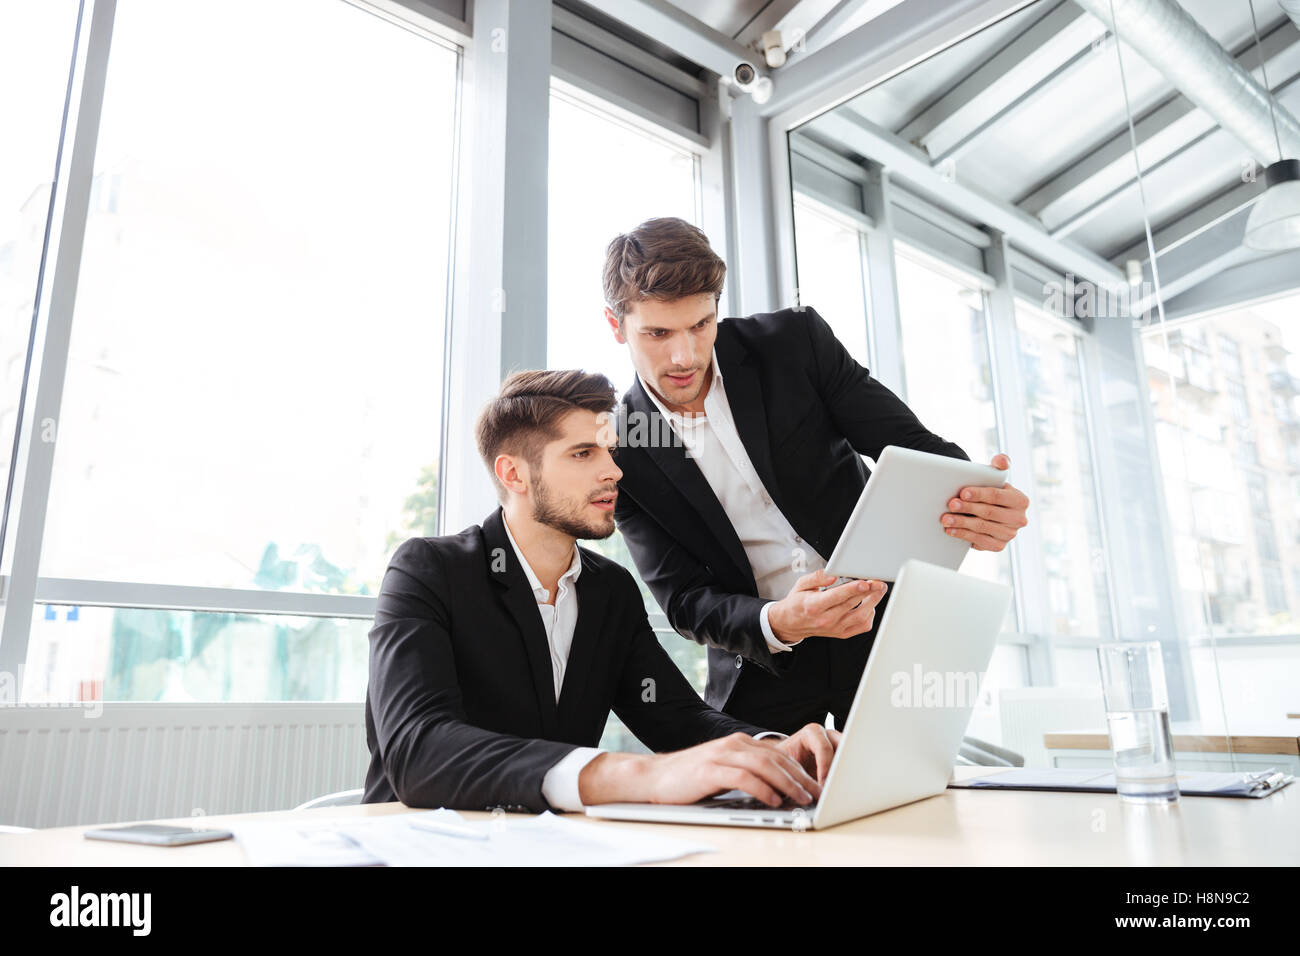 Two serious young businessmen using laptop and tablet in office together Stock Photo